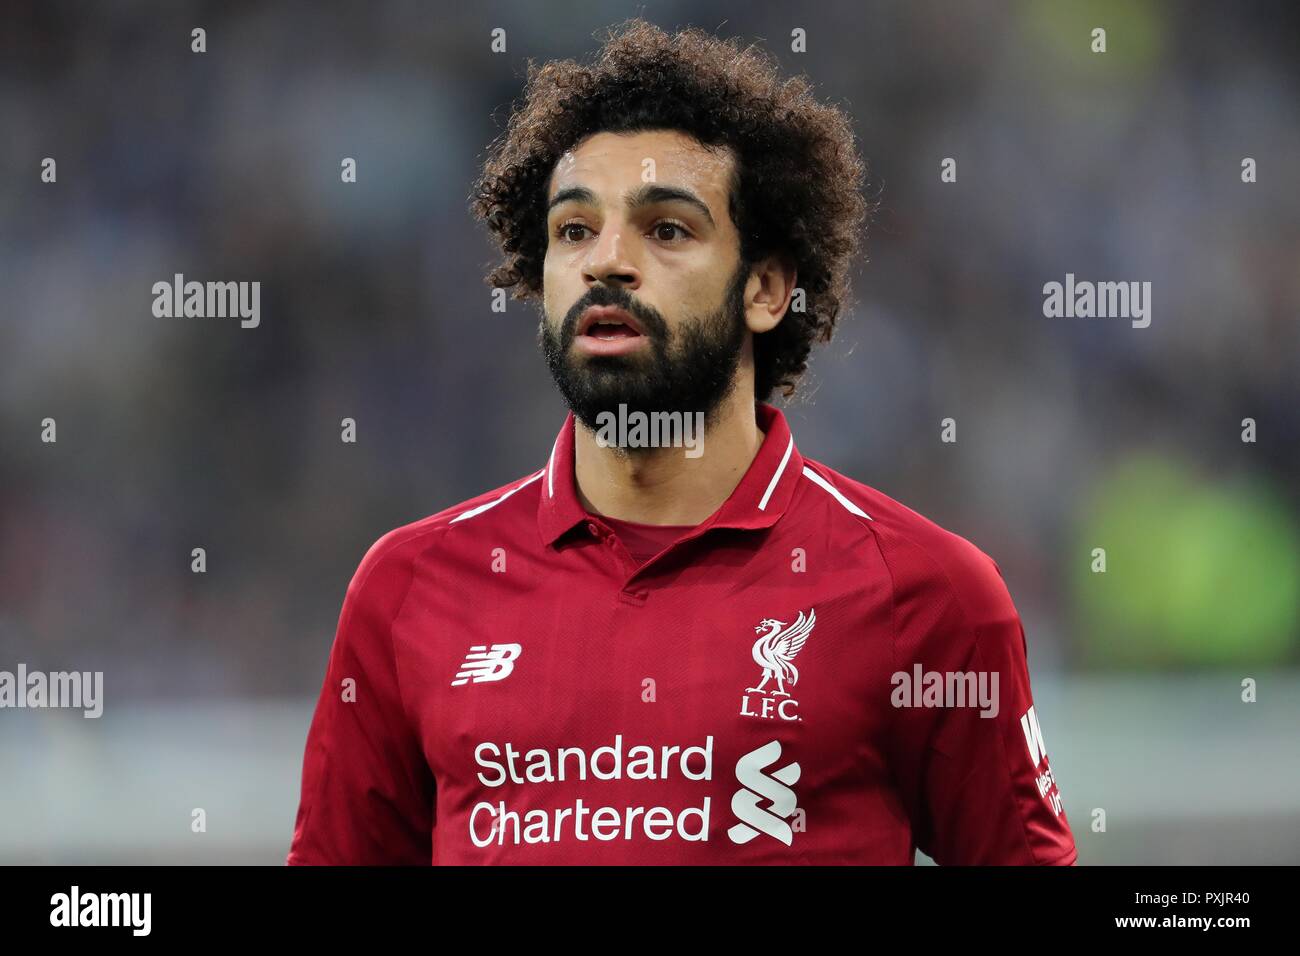 MOHAMED SALAH LIVERPOOL FC HUDDERSFIELD TOWN FC V LIVERPOOL FC, PREMIER LEAGUE JOHN SMITH'S STADIUM, HUDDERSFIELD, ENGLAND 20 October 2018 GBD12799 STRICTLY EDITORIAL USE ONLY. If The Player/Players Depicted In This Image Is/Are Playing For An English Club Or The England National Team. Then This Image May Only Be Used For Editorial Purposes. No Commercial Use. The Following Usages Are Also Restricted EVEN IF IN AN EDITORIAL CONTEXT: Use in conjuction with, or part of, any unauthorized audio, video, data, fixture lists, club/league logos, Betting, Games or any 'live' service Stock Photo